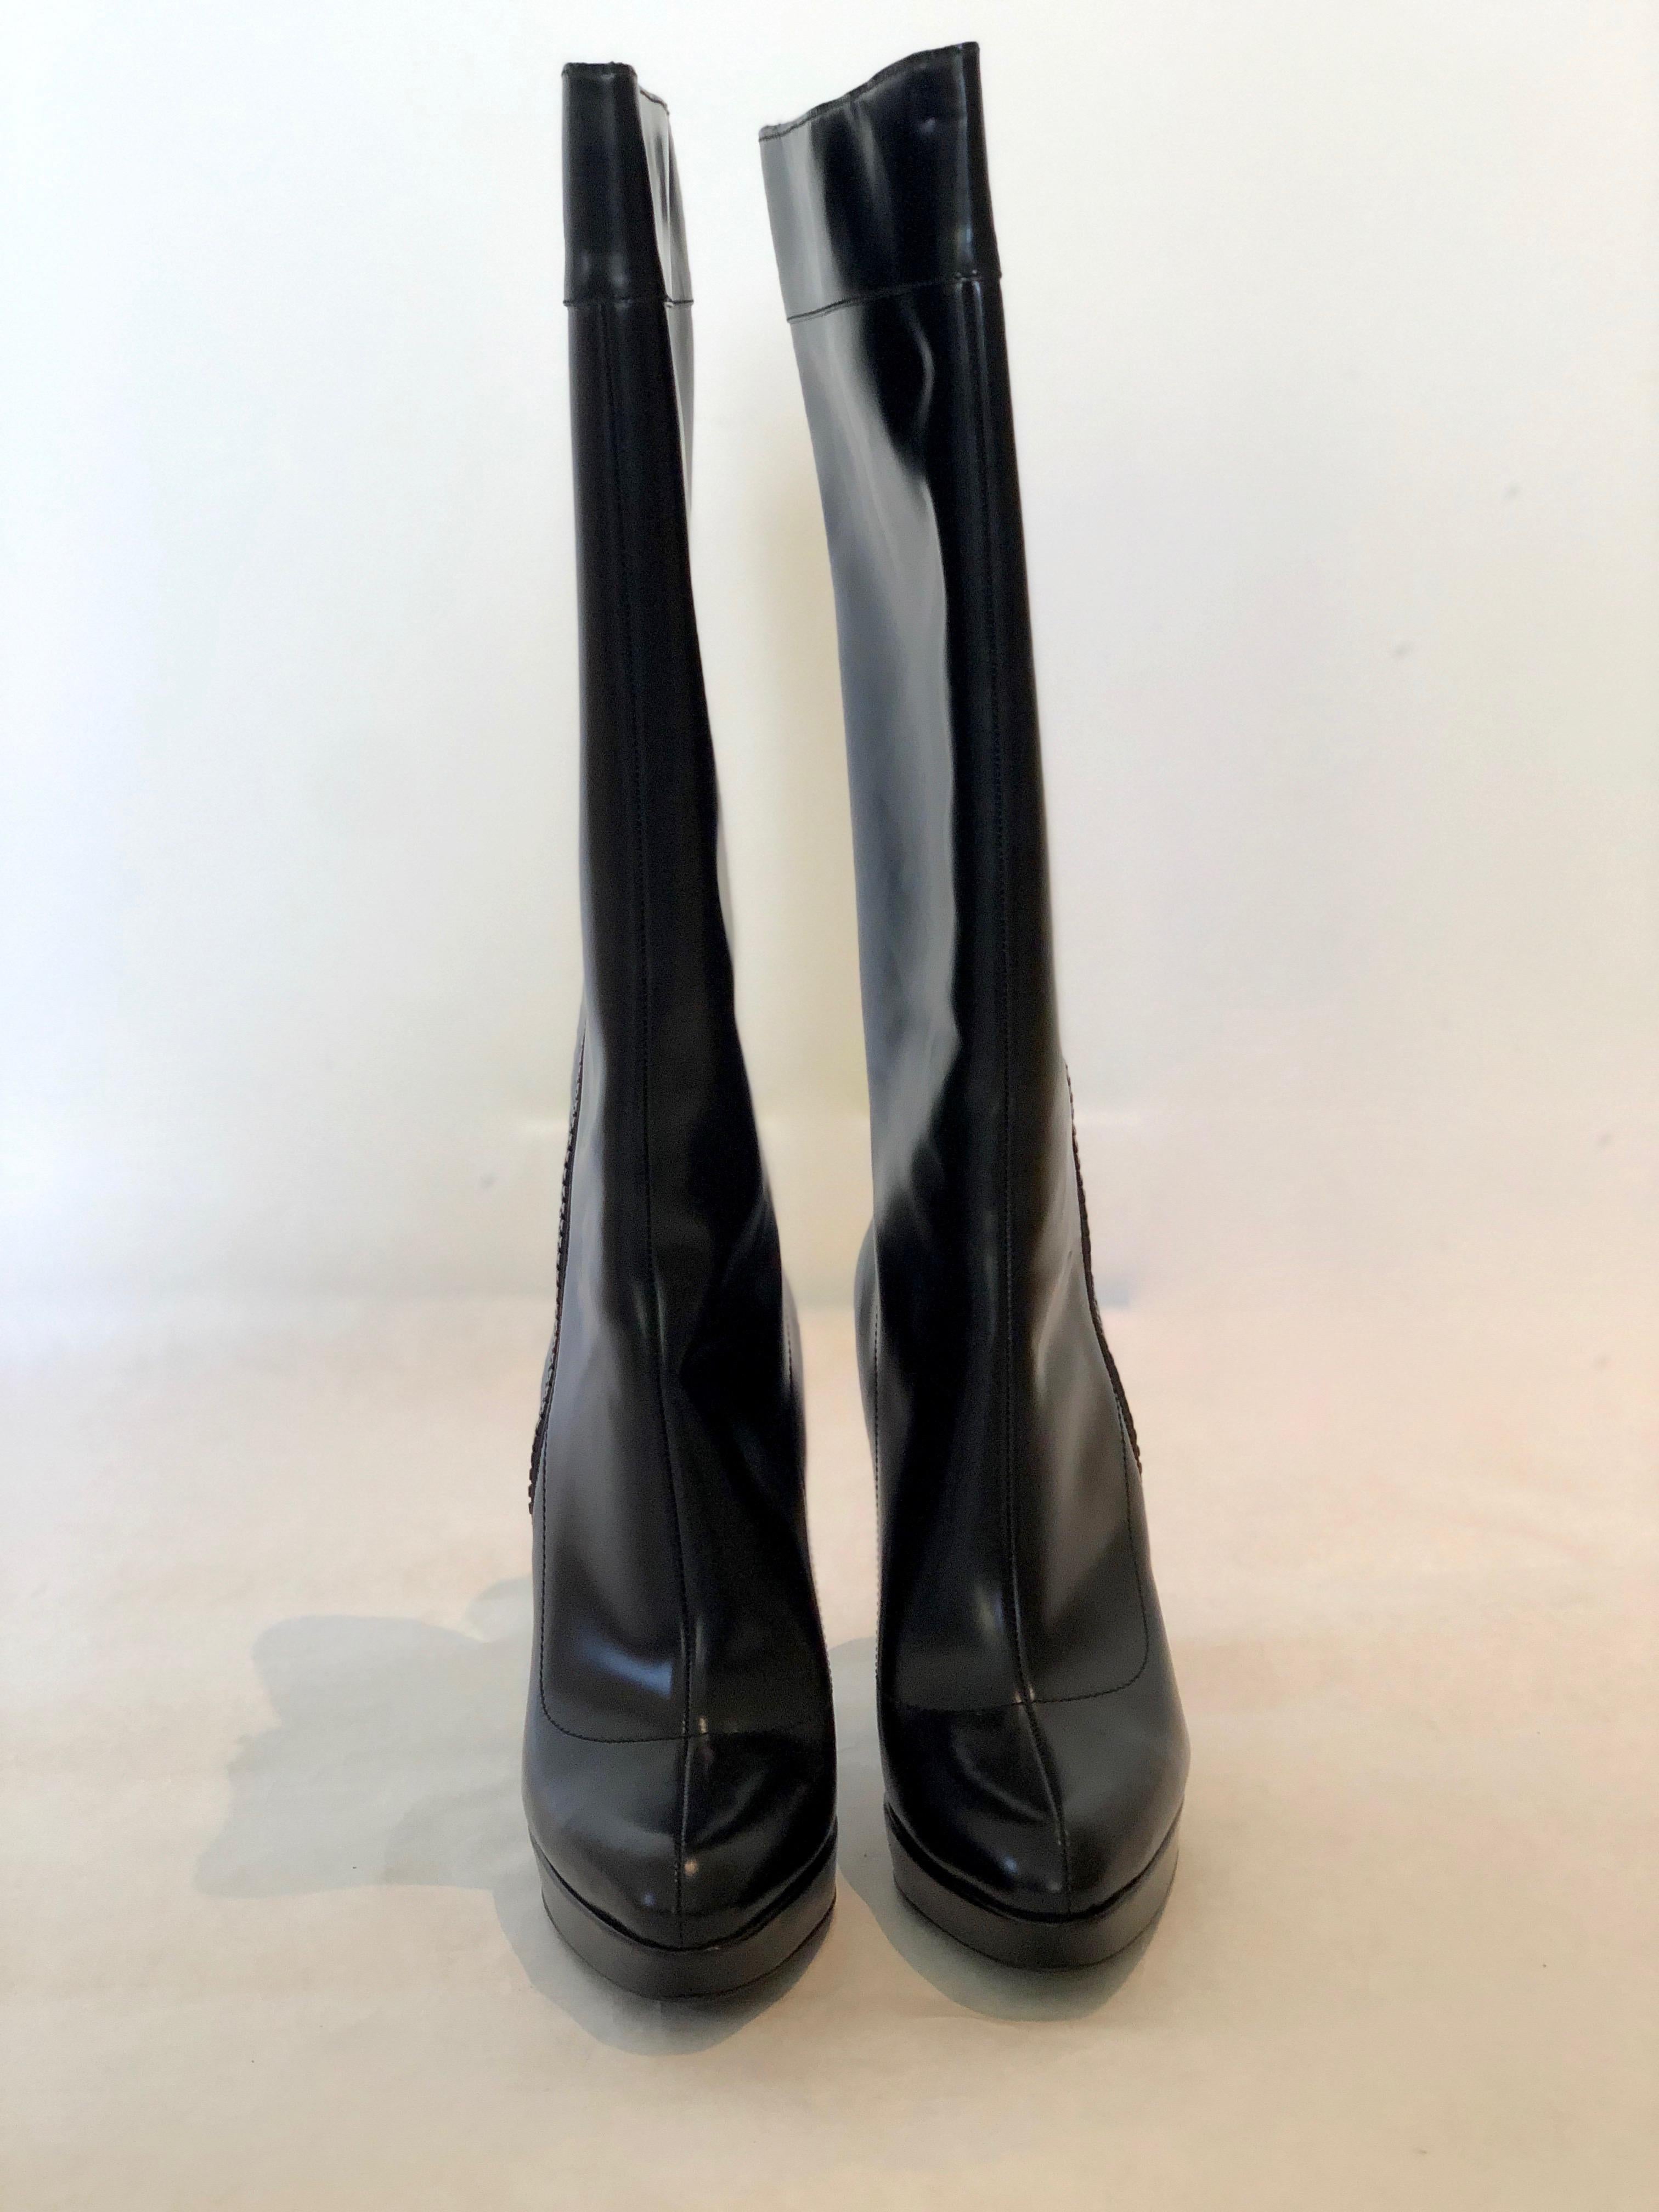 Make:  Gucci
Place of Manufacture:  Italy
Size:  39 EU / 9 U.S.
Materials:  Leather
Color:  Black
Style:  Shiny black side zip pointy toe platform with 4